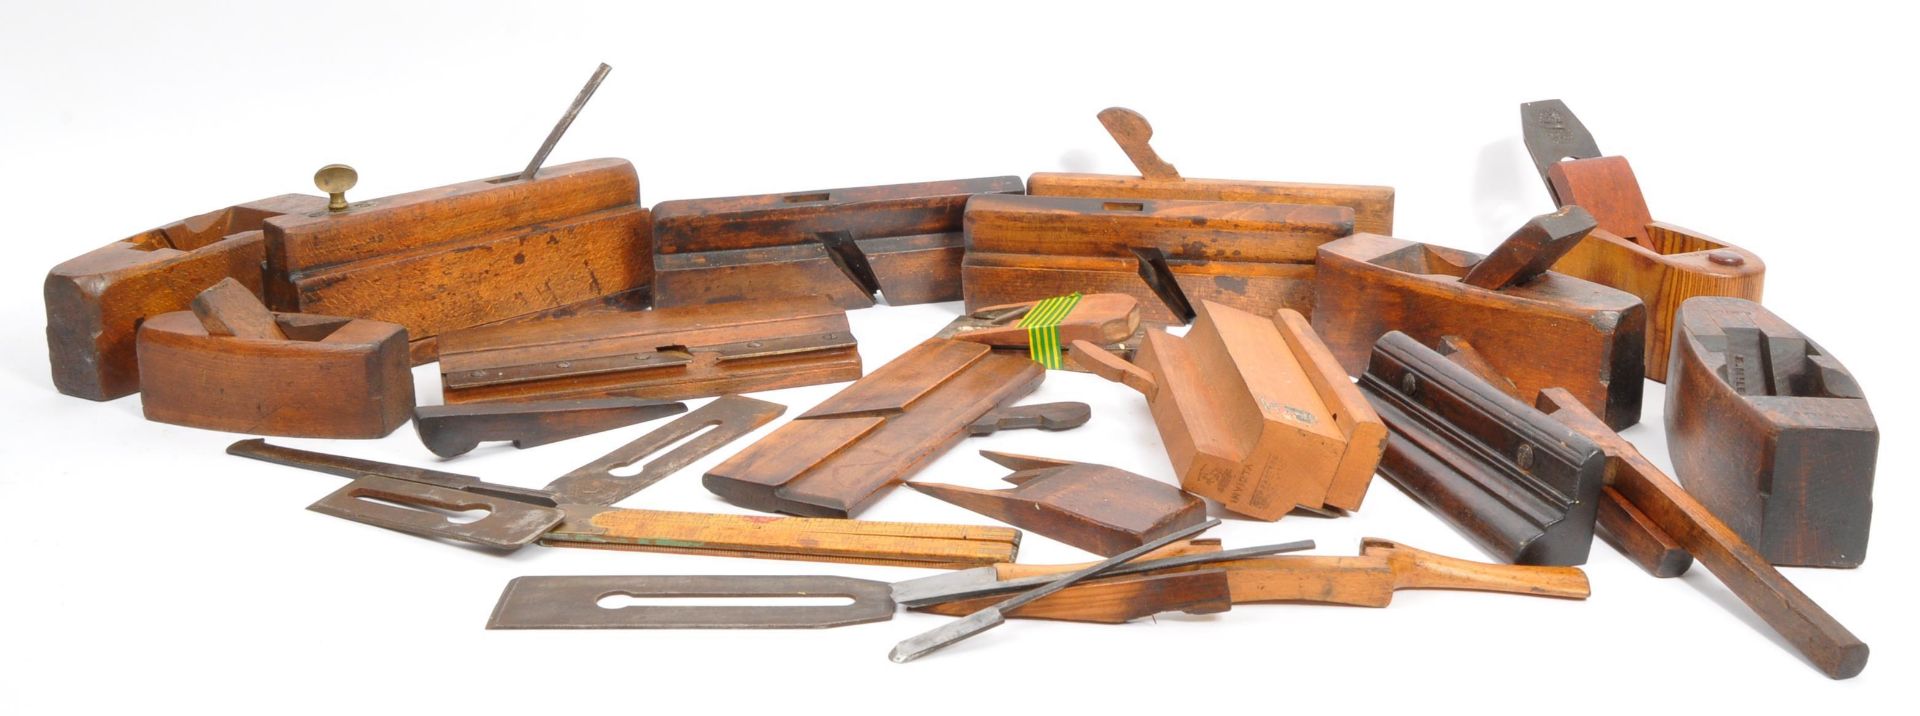 COLLECTION OF 19TH CENTURY BEECH WOODWORKER PLANE